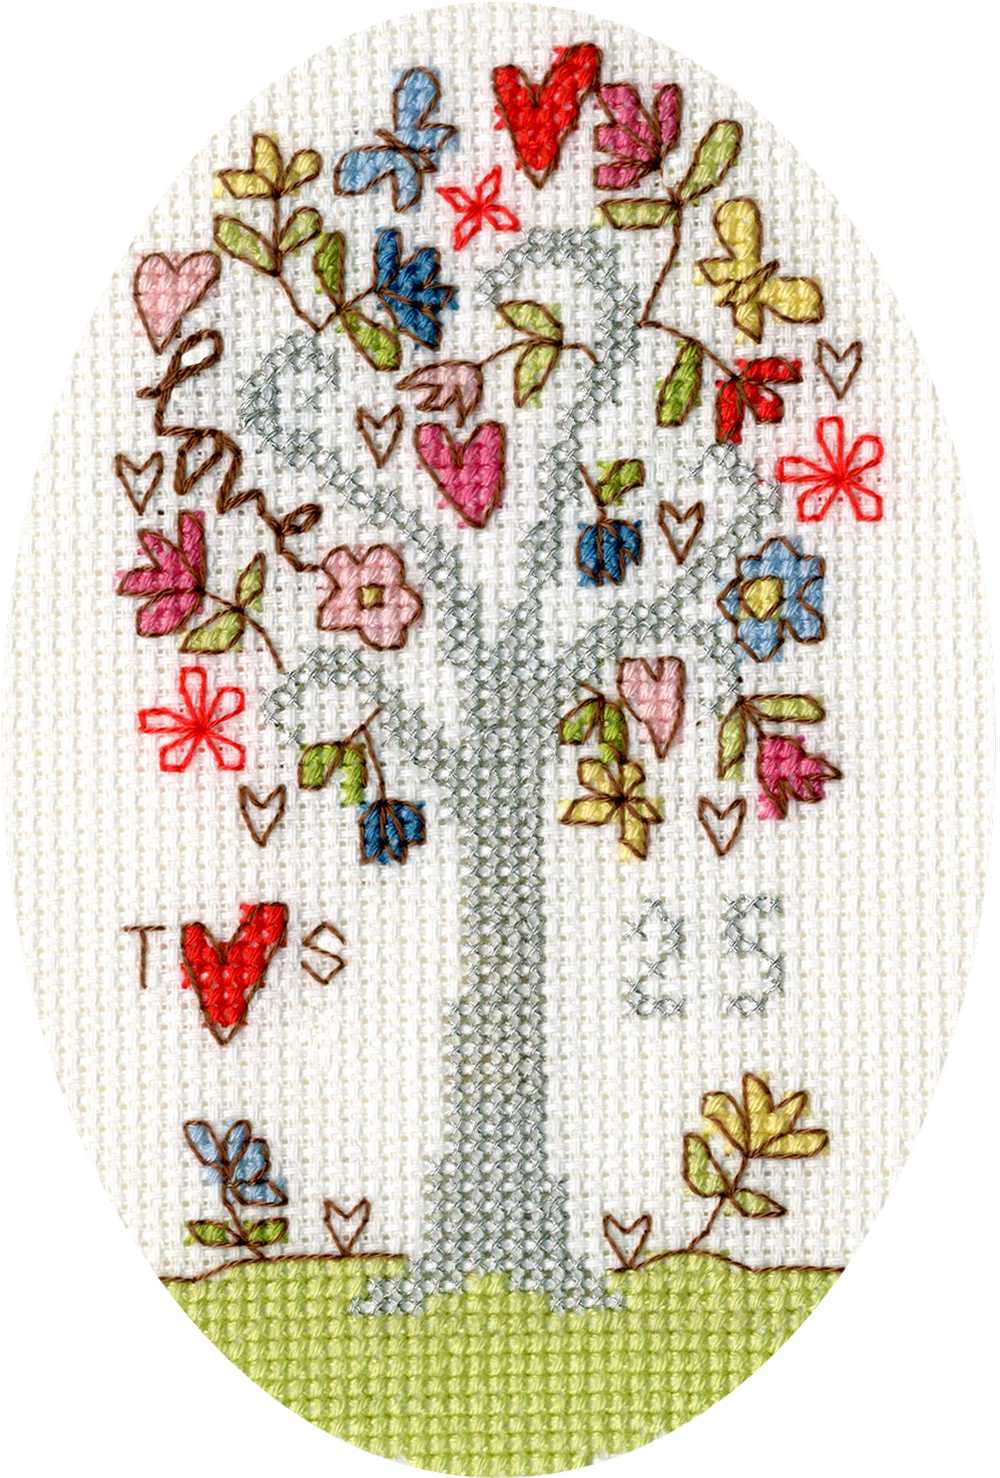 Silver Celebration - Counted Cross Stitch Greetings Card Kit From Bothy Threads